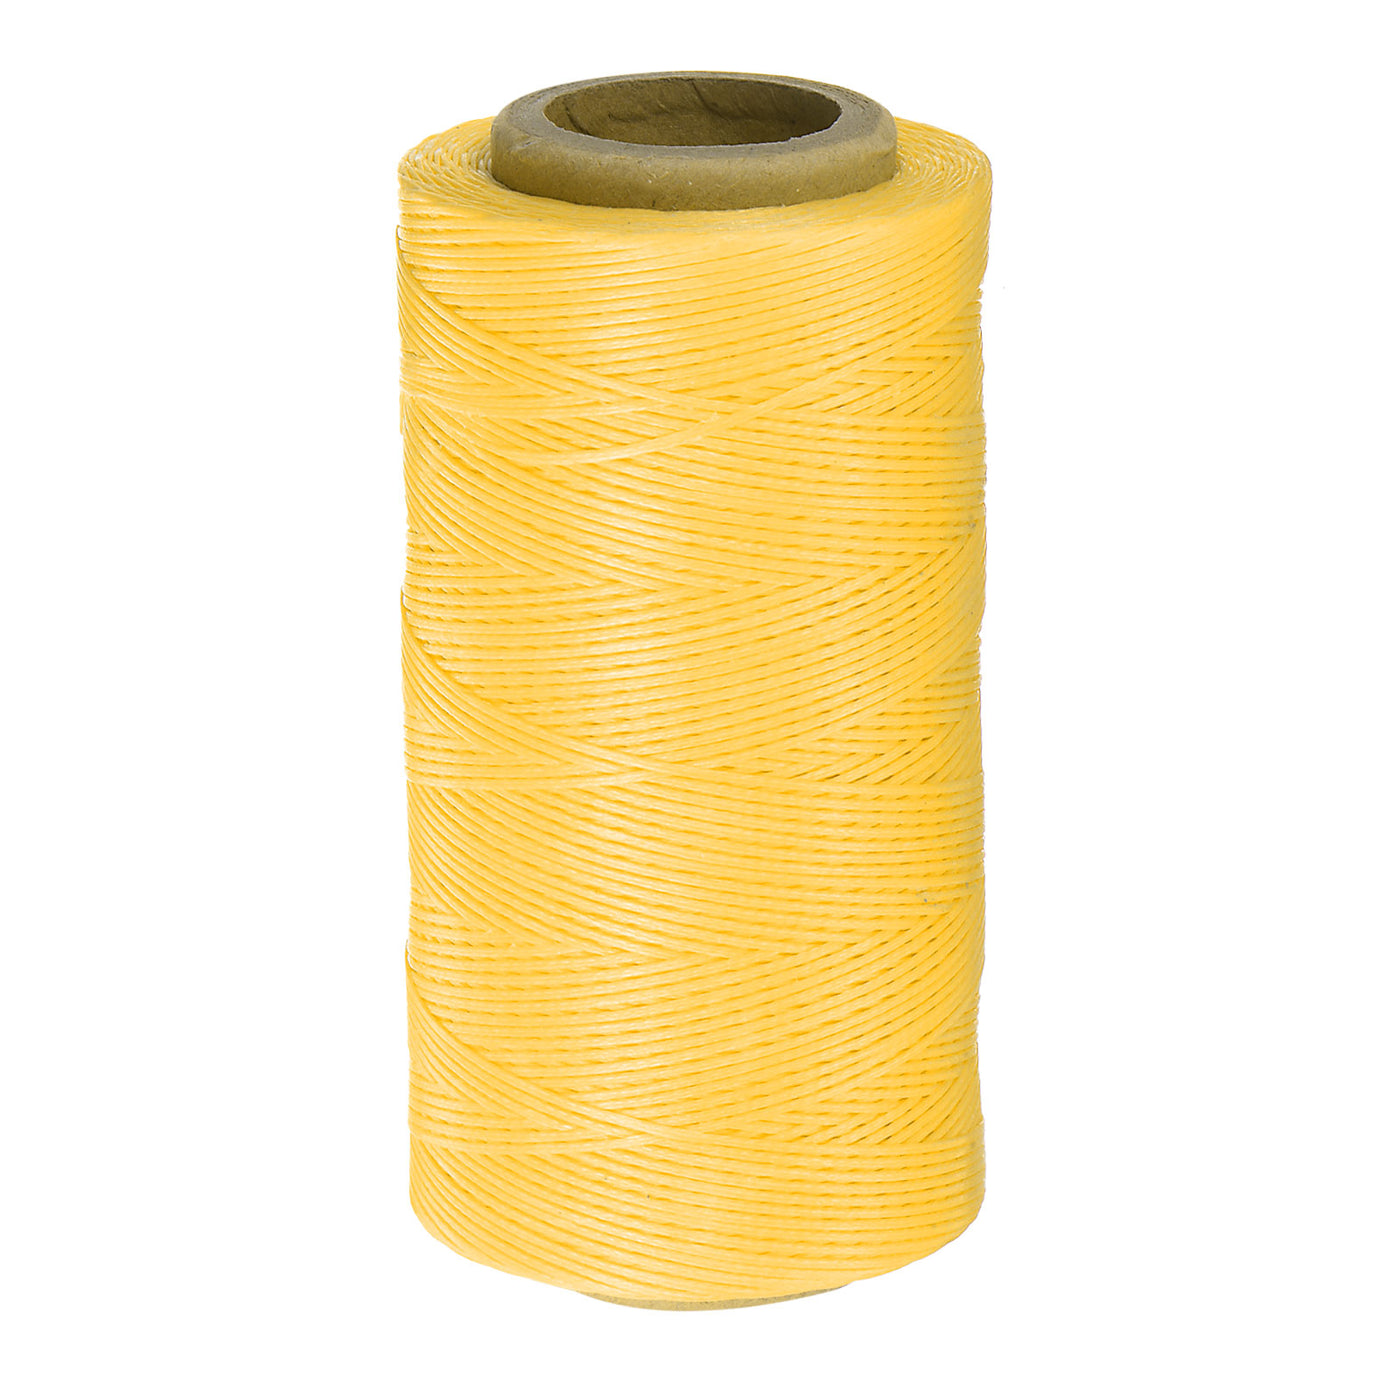 Harfington Upholstery Sewing Thread 284 Yards 260m Polyester String Yellow